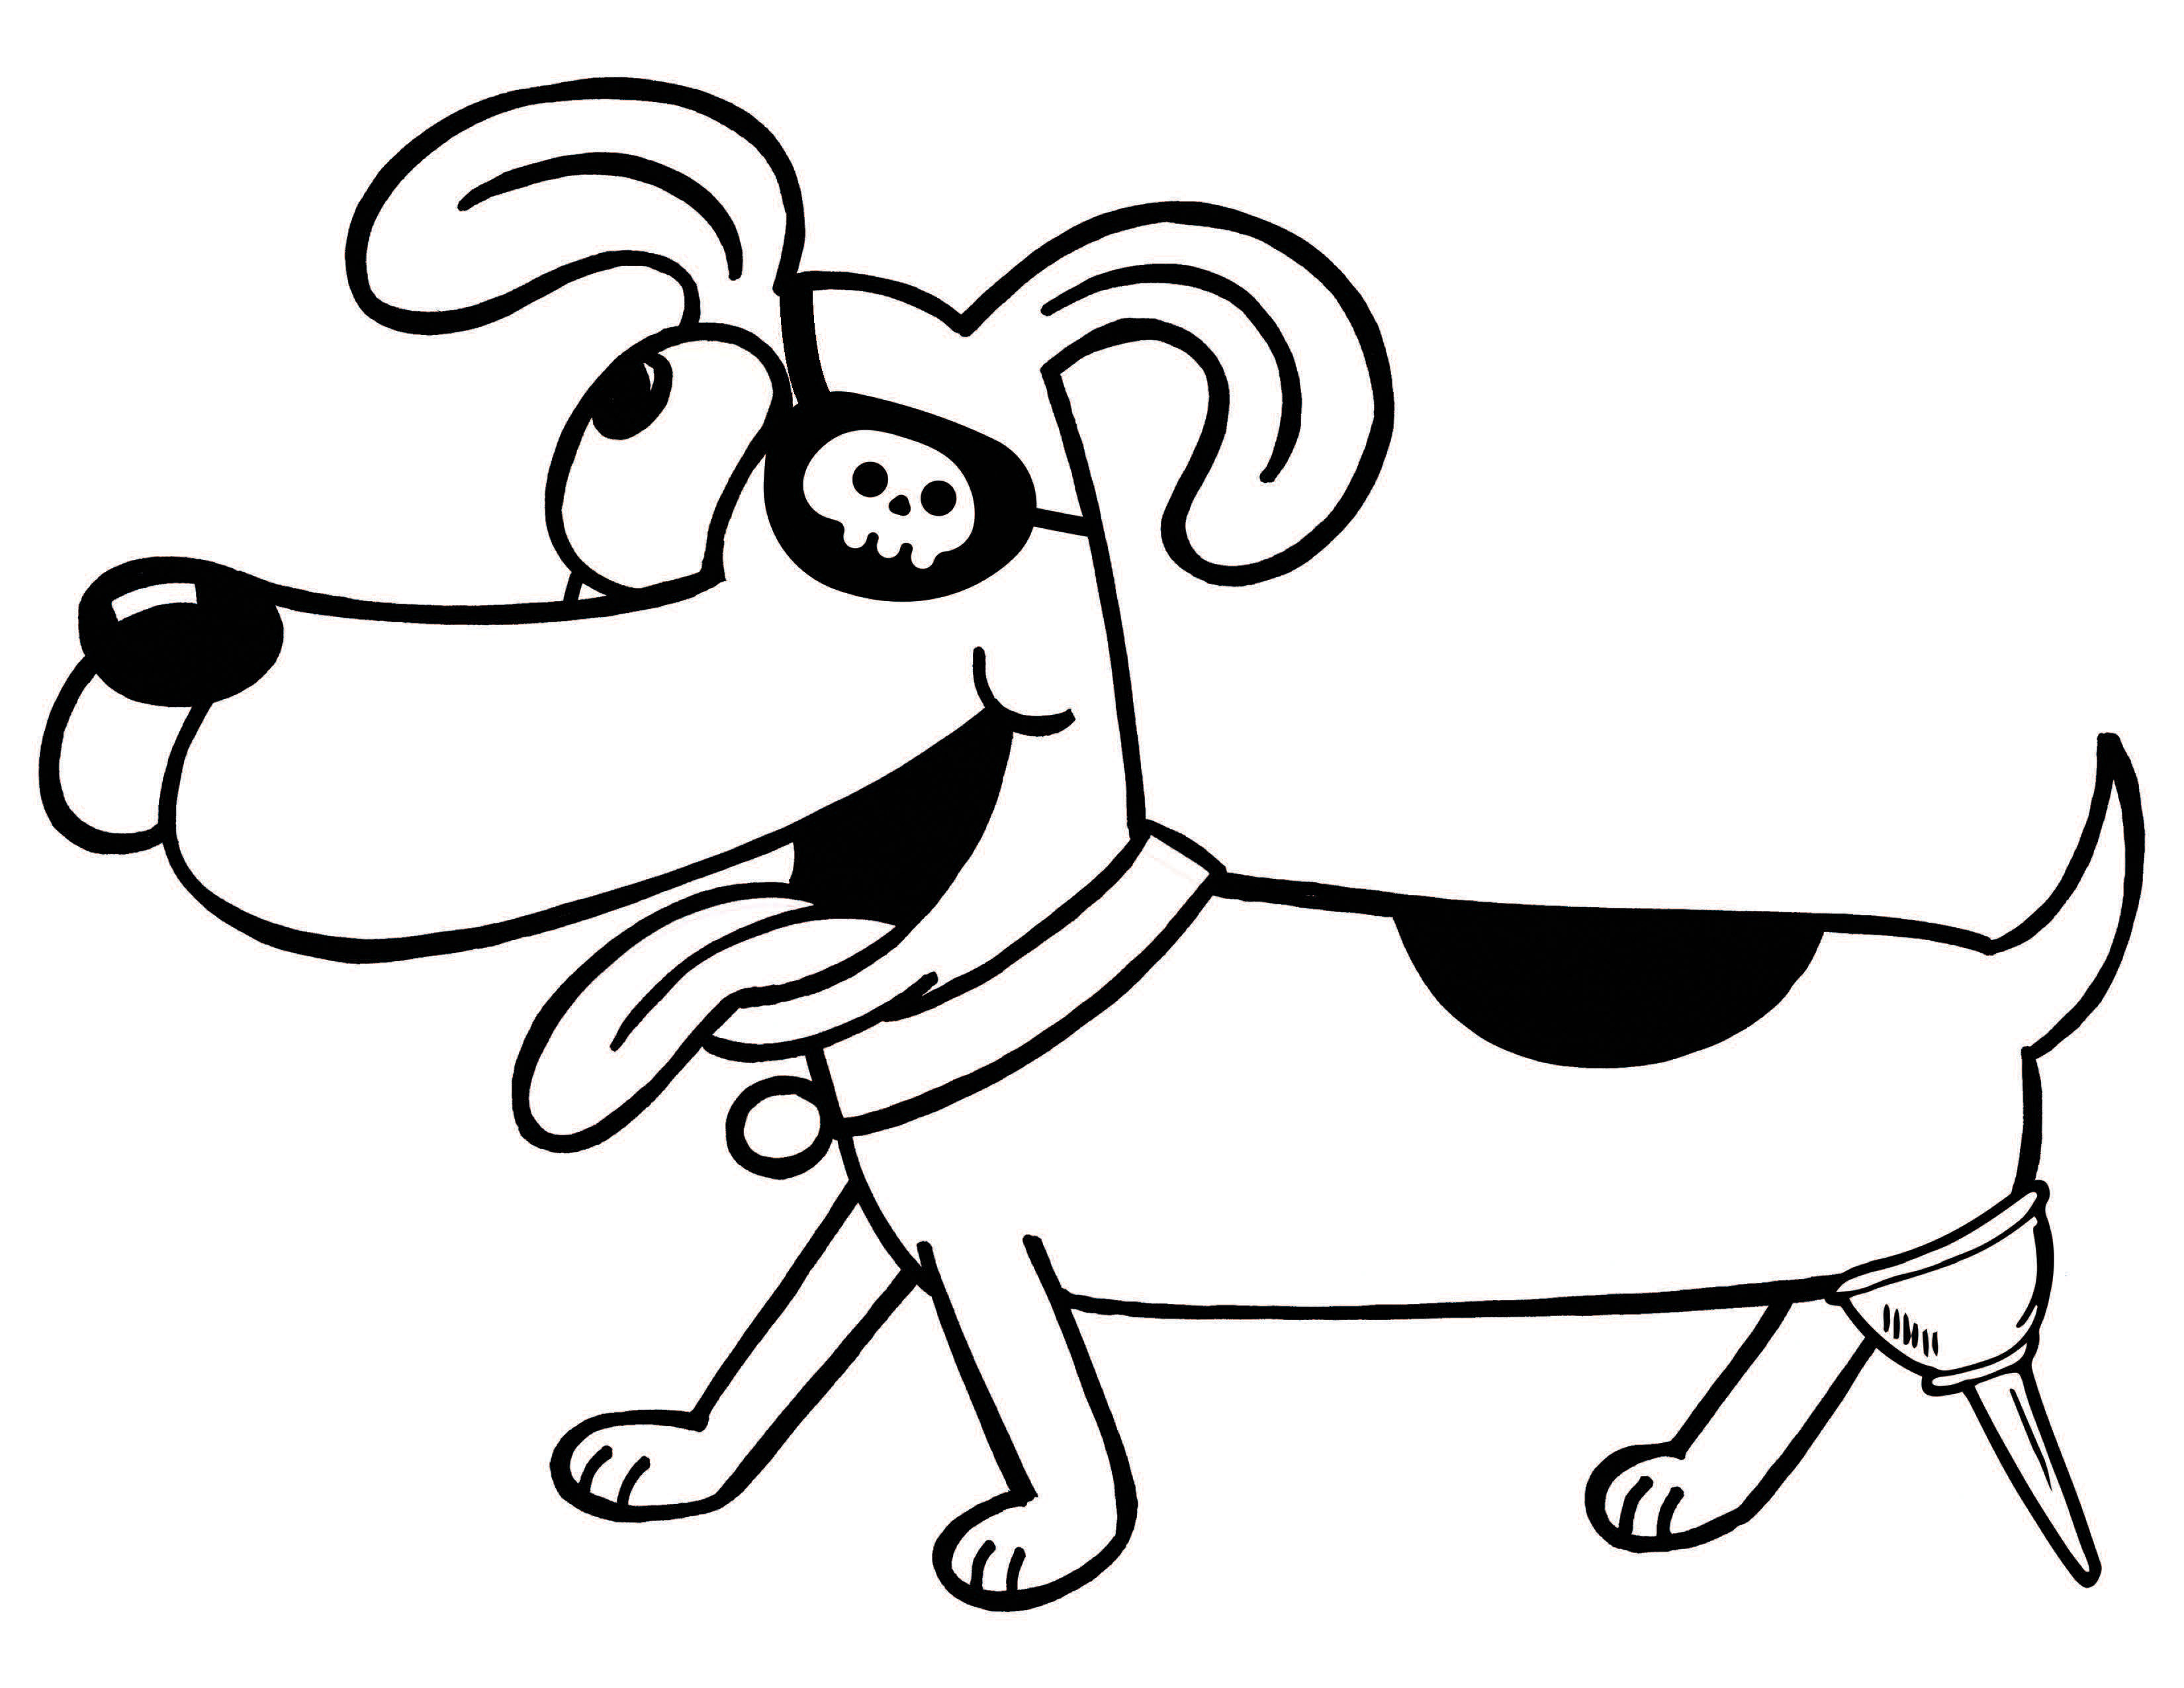 Pirate Pete the dog coloring page for JaxKids Book Club